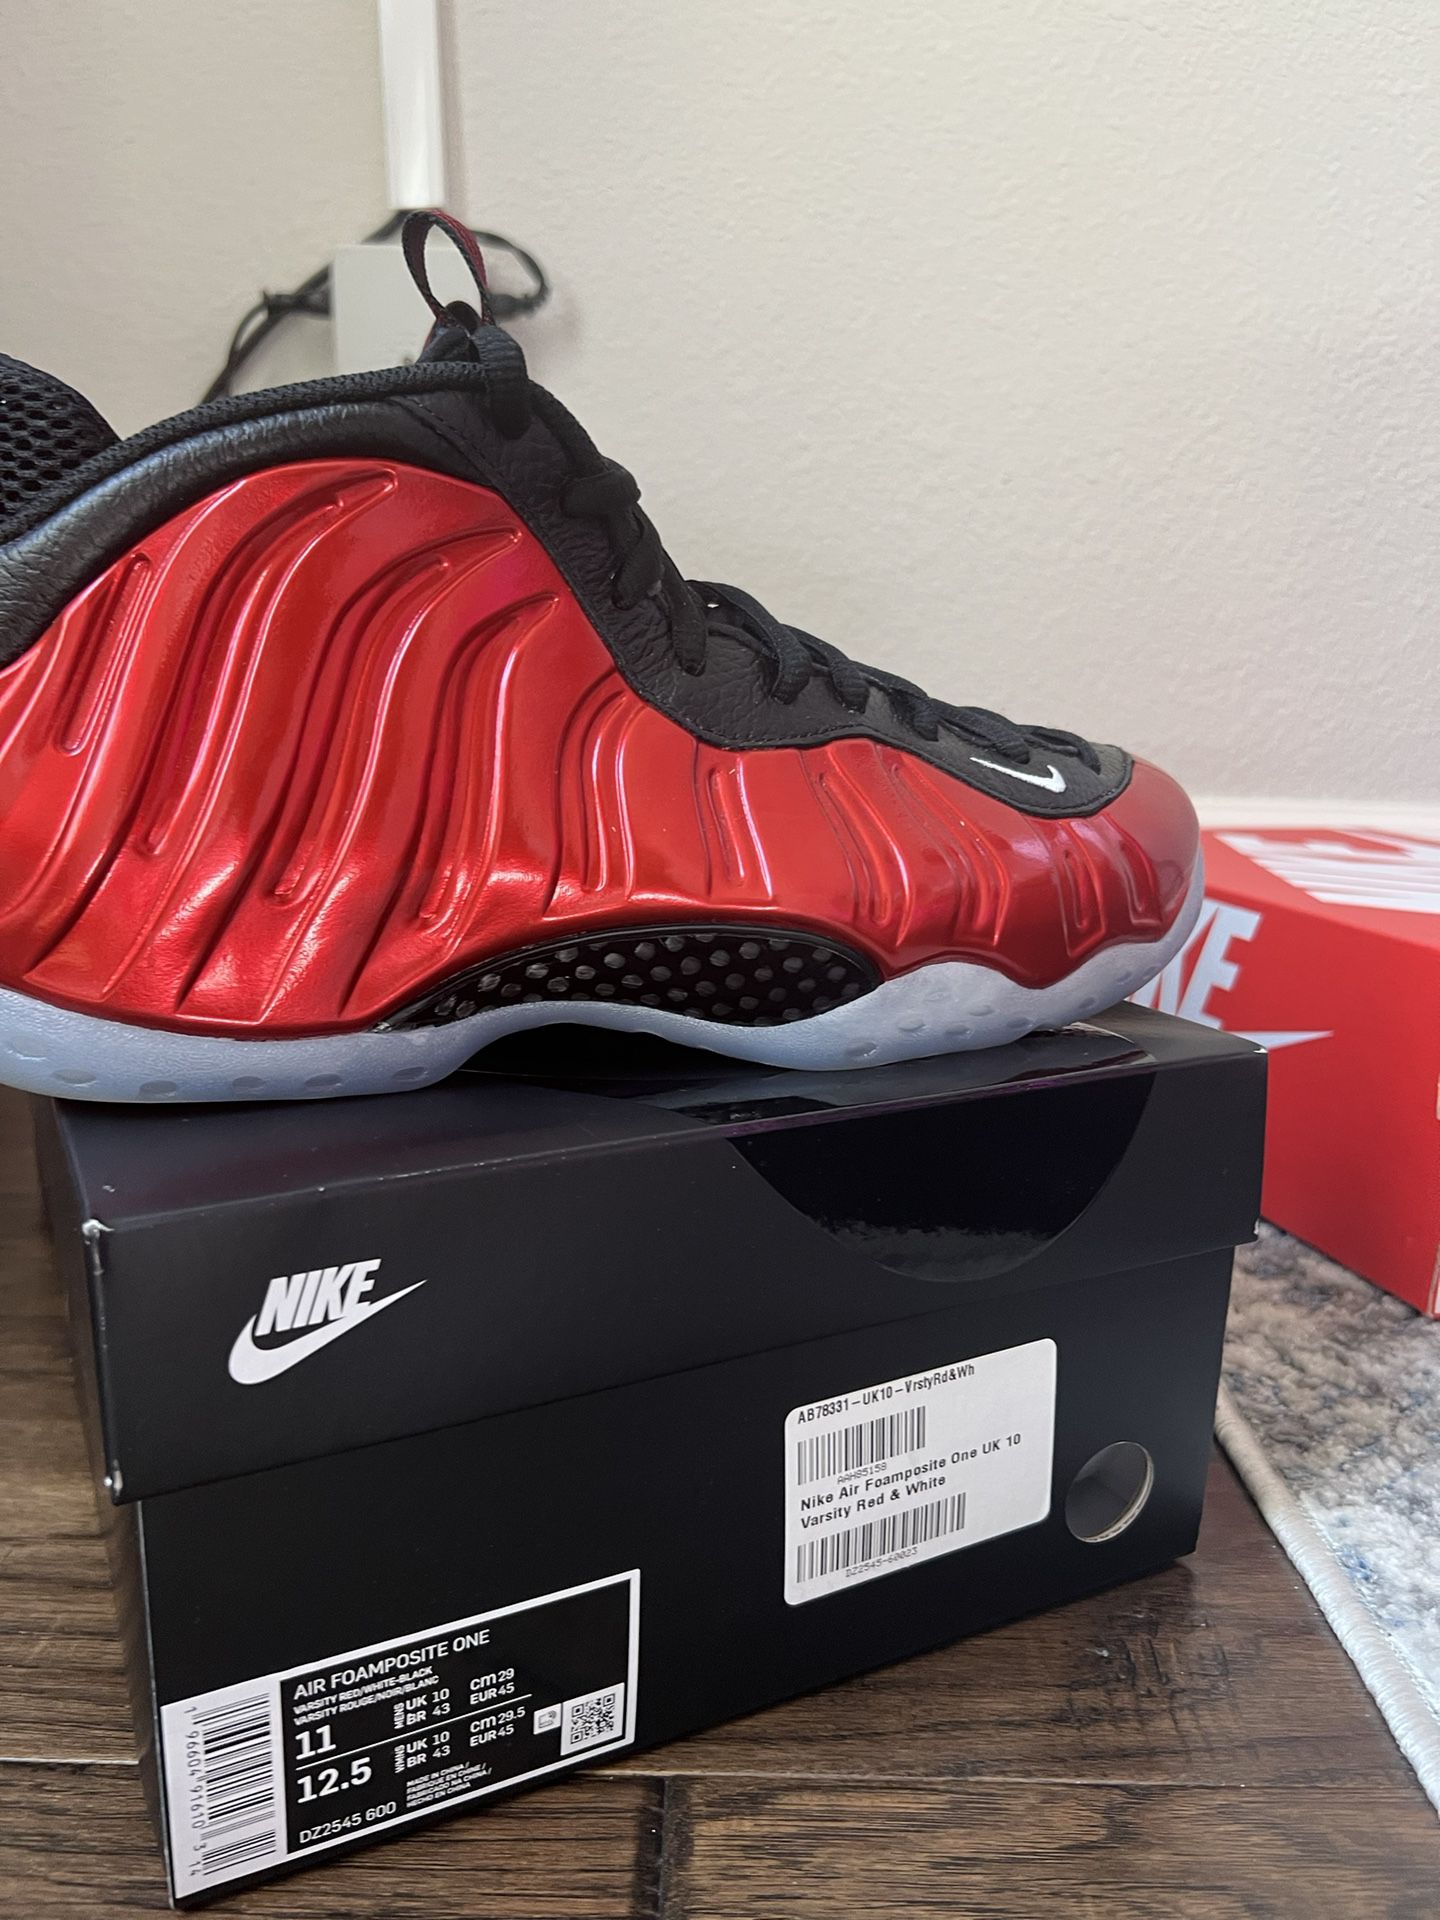 Nike Air Foamposite One Metallic Red . DS for Sale in Frisco